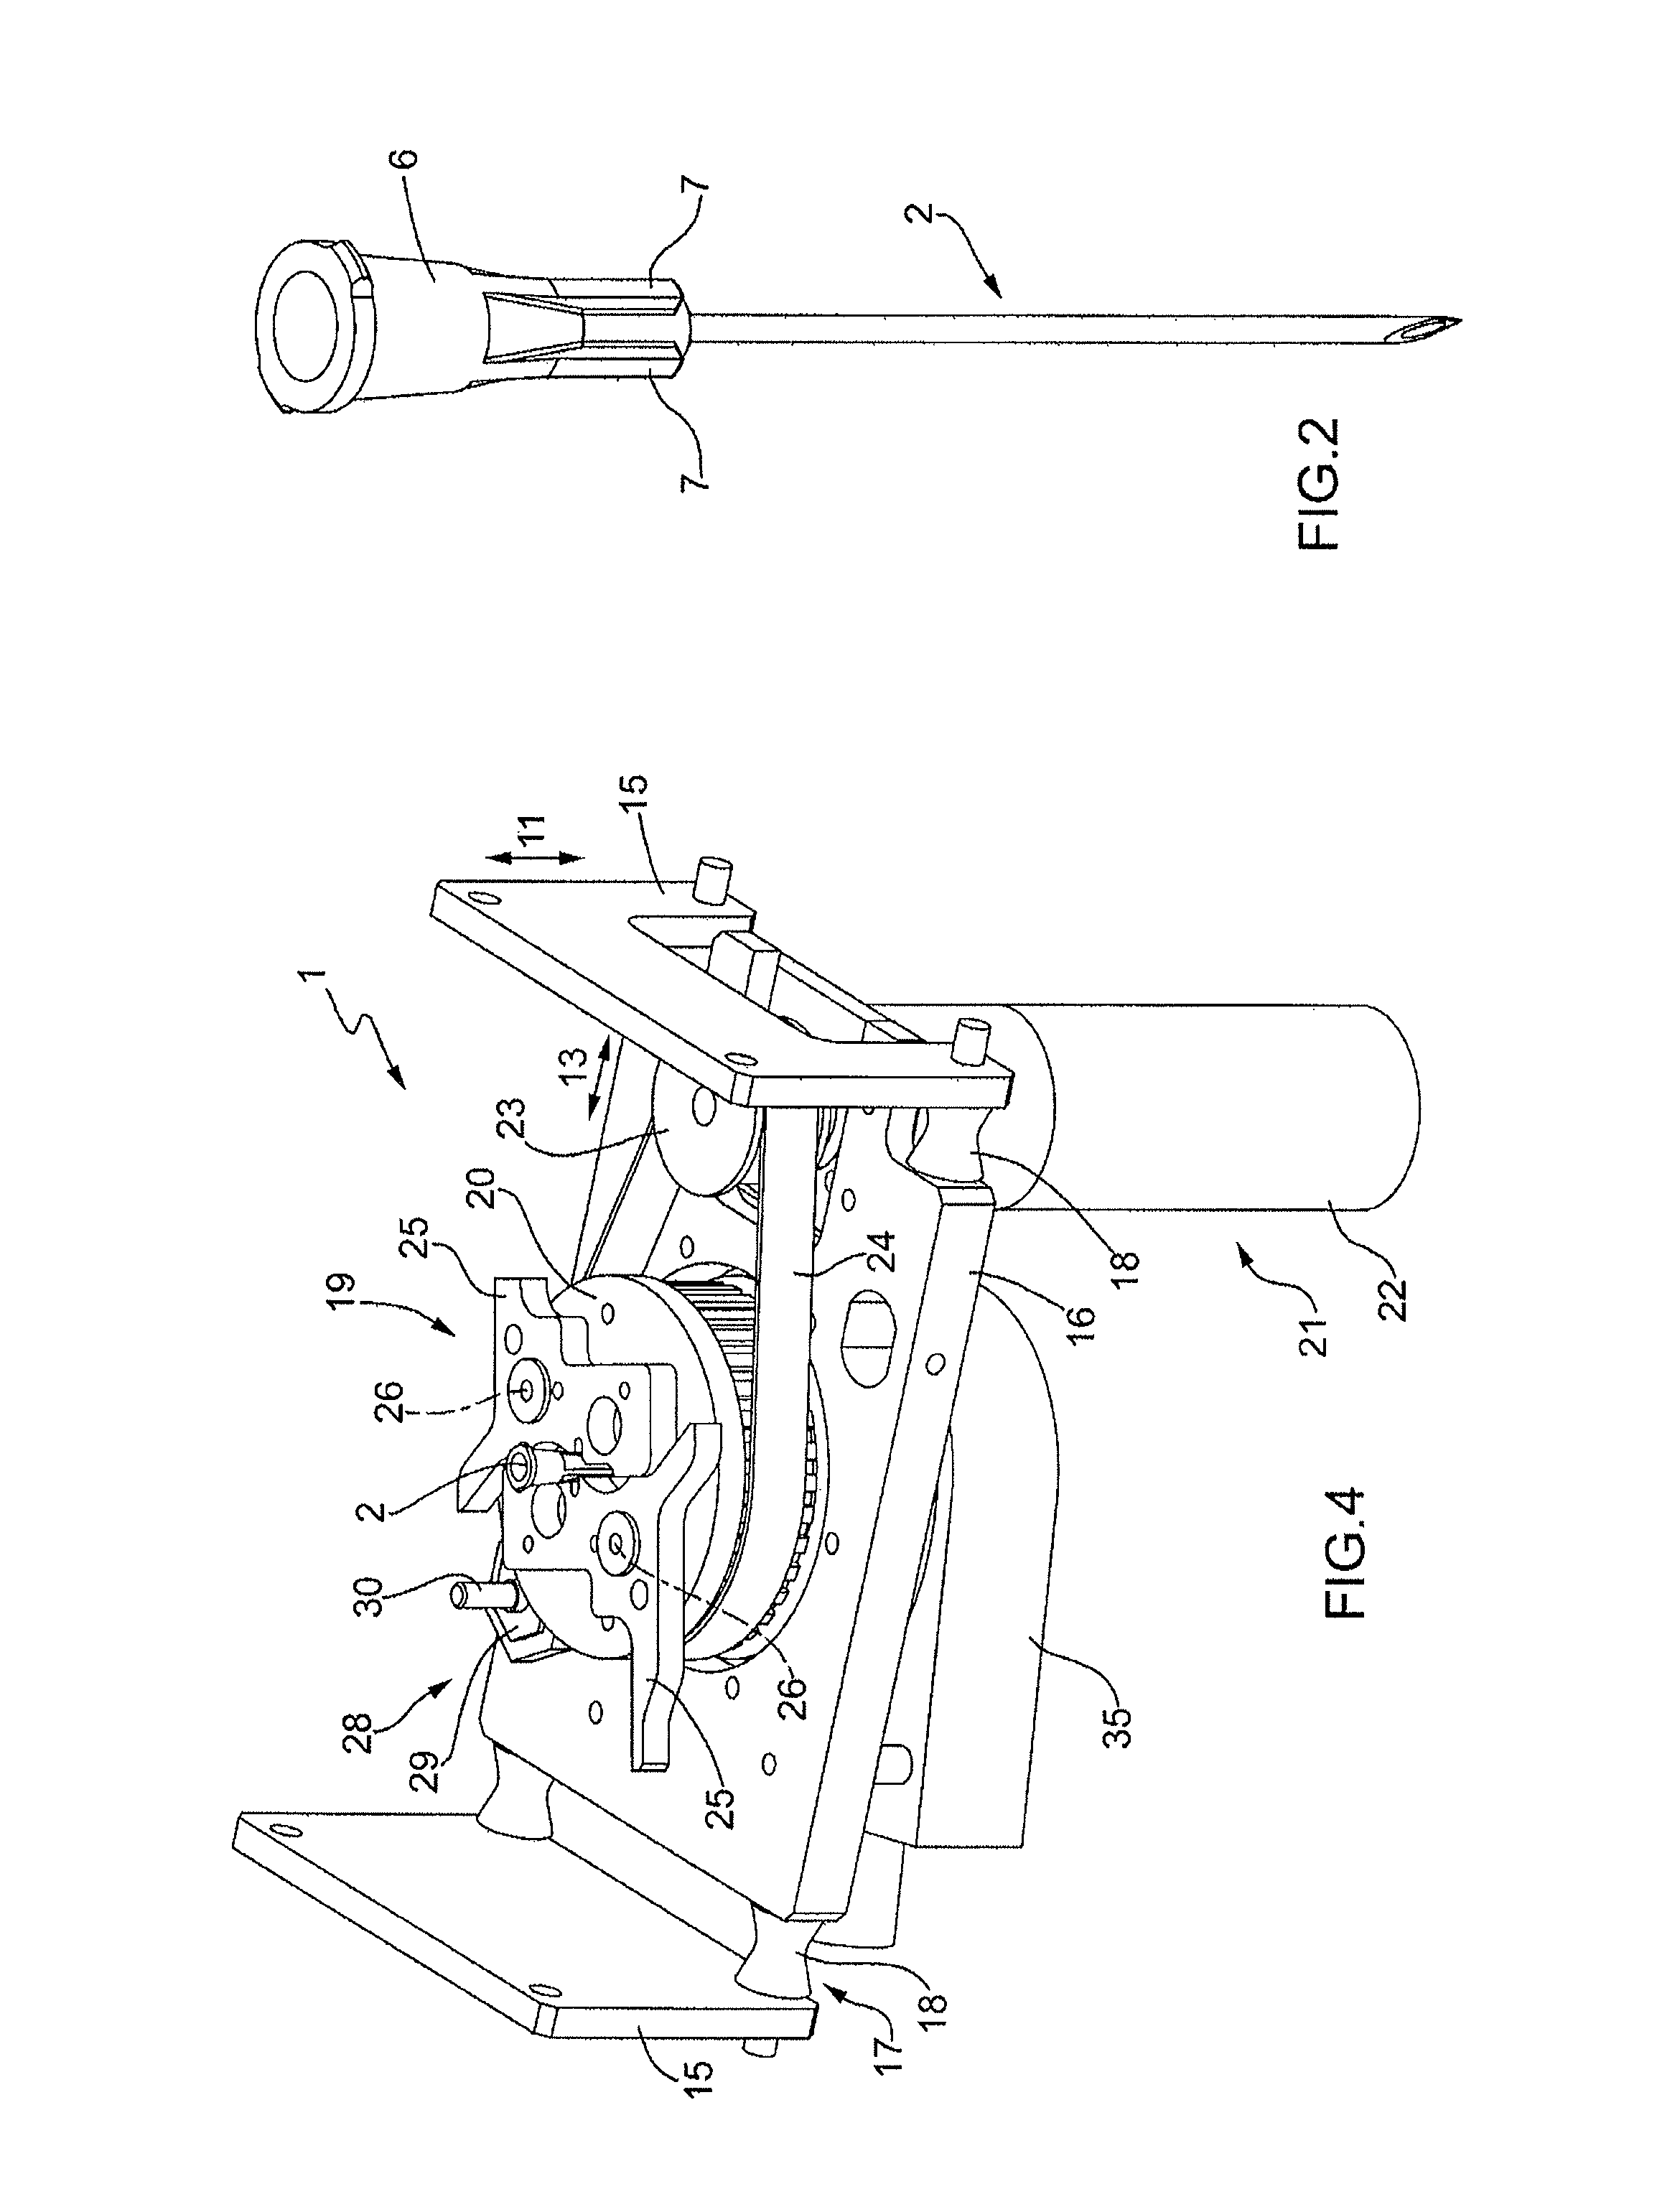 Apparatus for the removal of needles of syringes